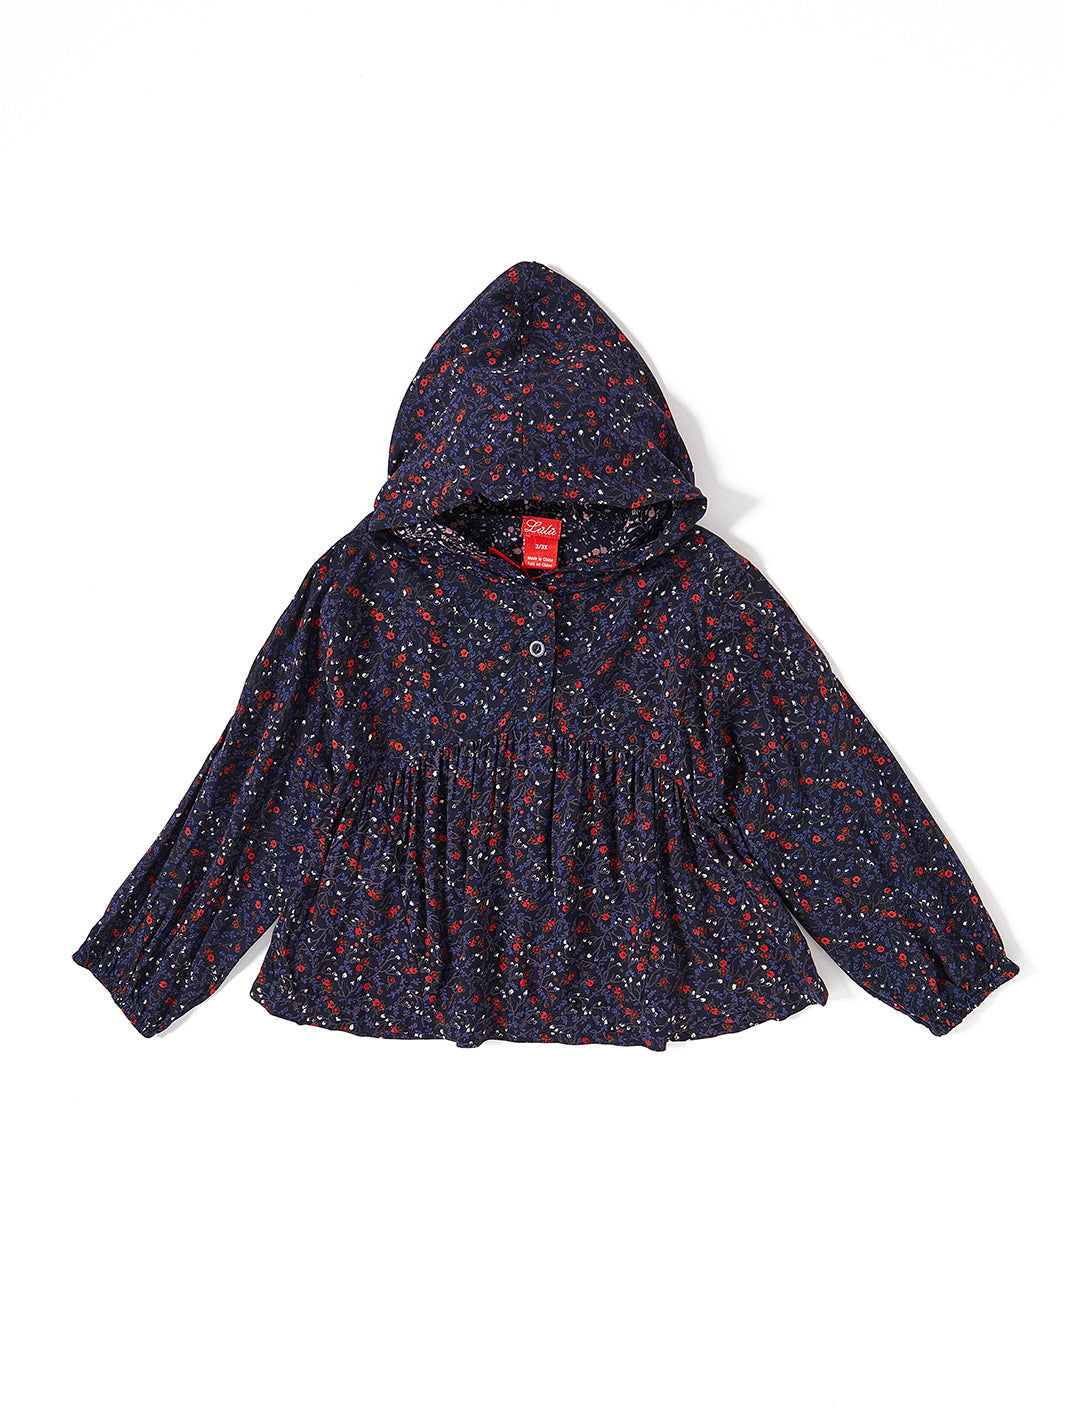 Floral Berry Hooded Top